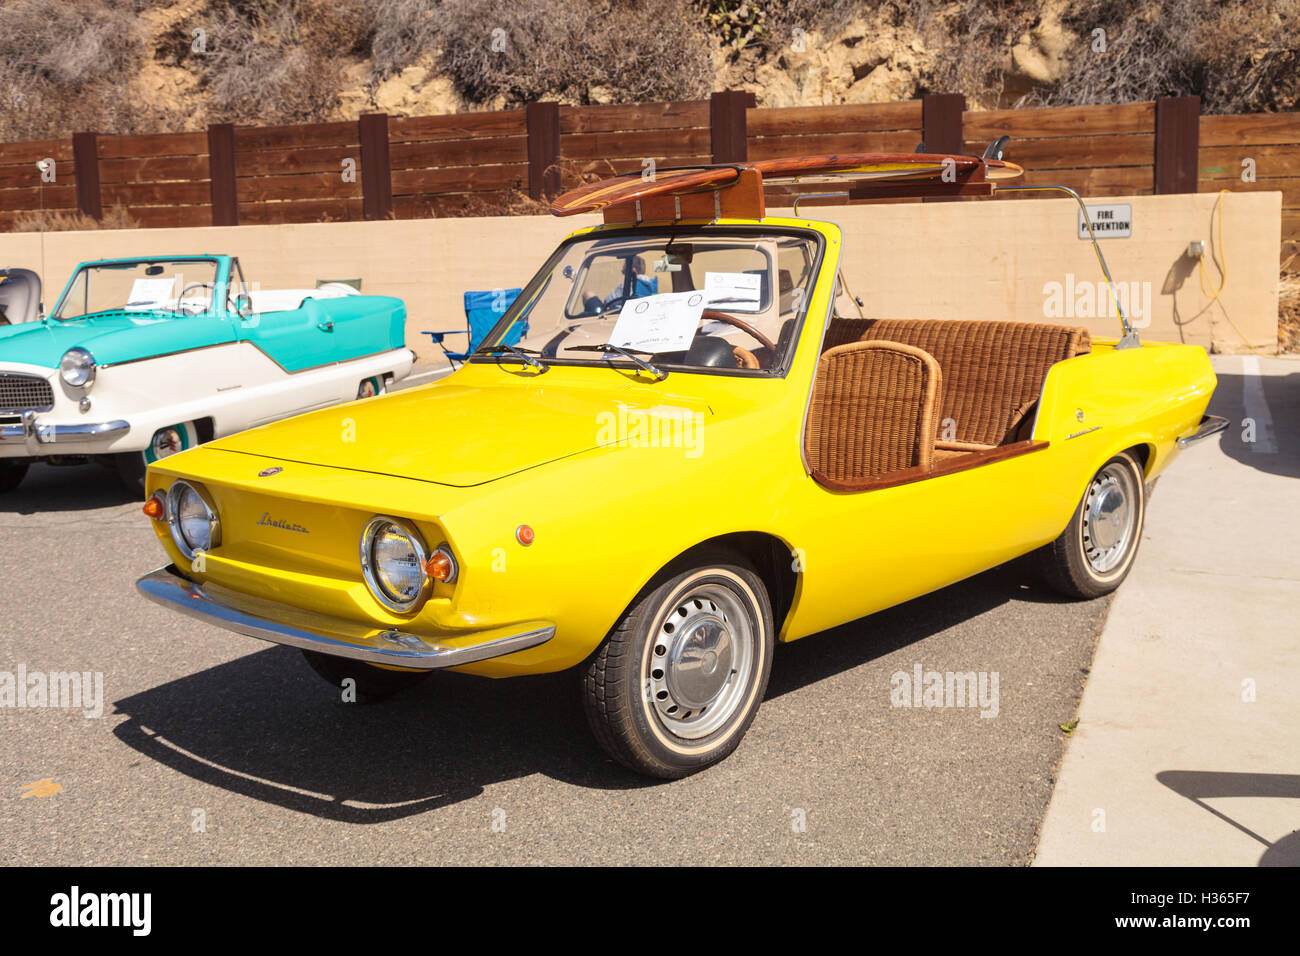 Laguna Beach, CA, USA - October 2, 2016: Yellow 1970 Fiat Schiller with wicker seats owned by Jim Roy Stock Photo